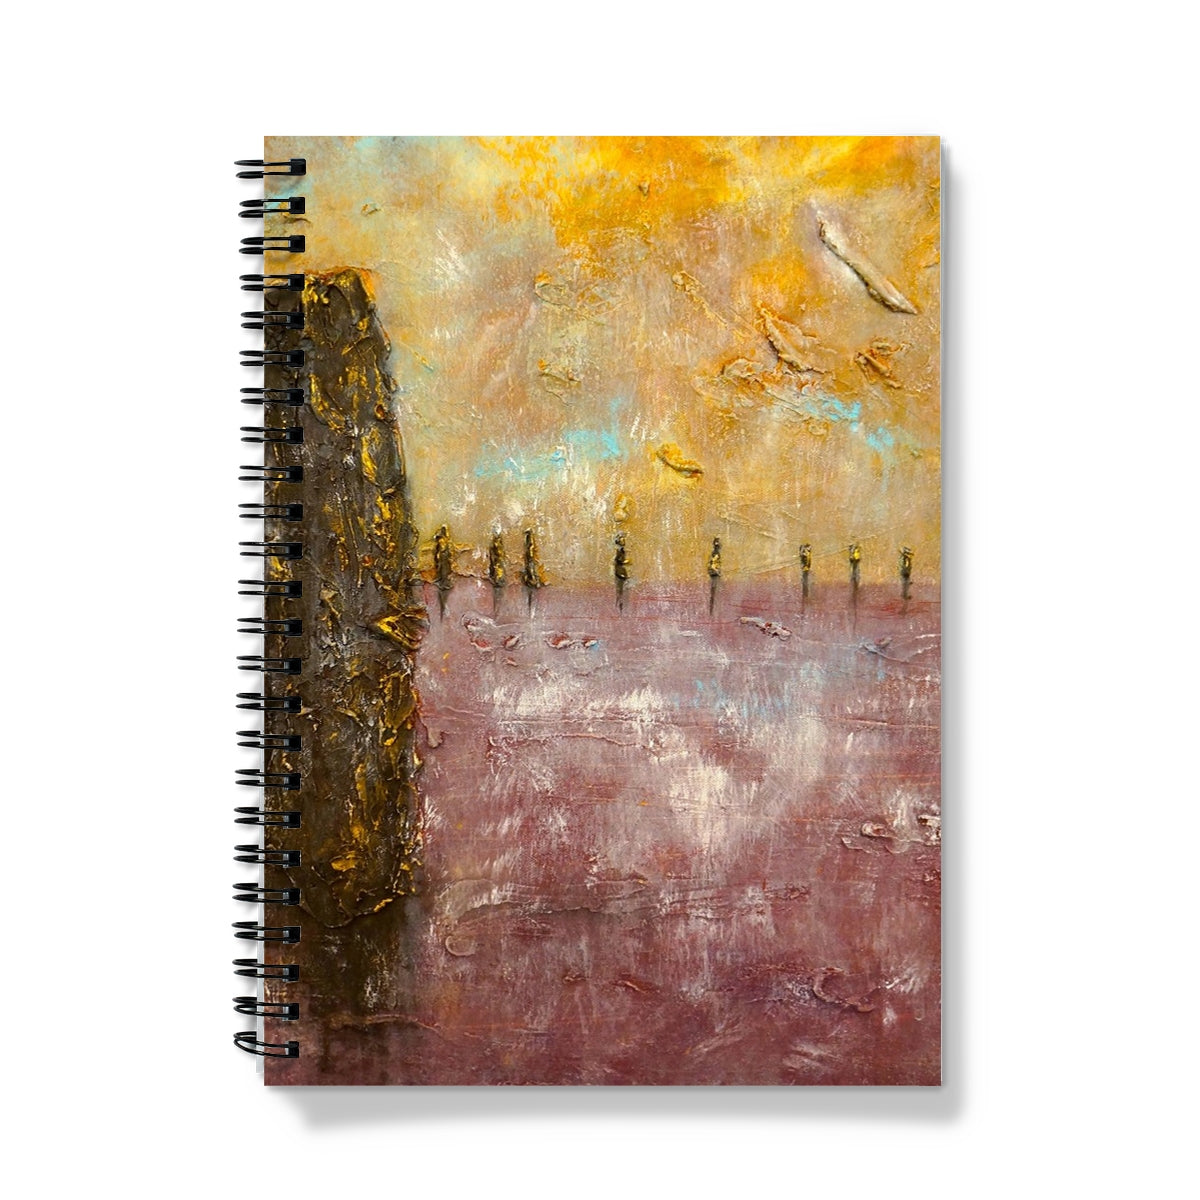 Bordgar Mist Orkney Art Gifts Notebook-Journals & Notebooks-Orkney Art Gallery-A5-Lined-Paintings, Prints, Homeware, Art Gifts From Scotland By Scottish Artist Kevin Hunter